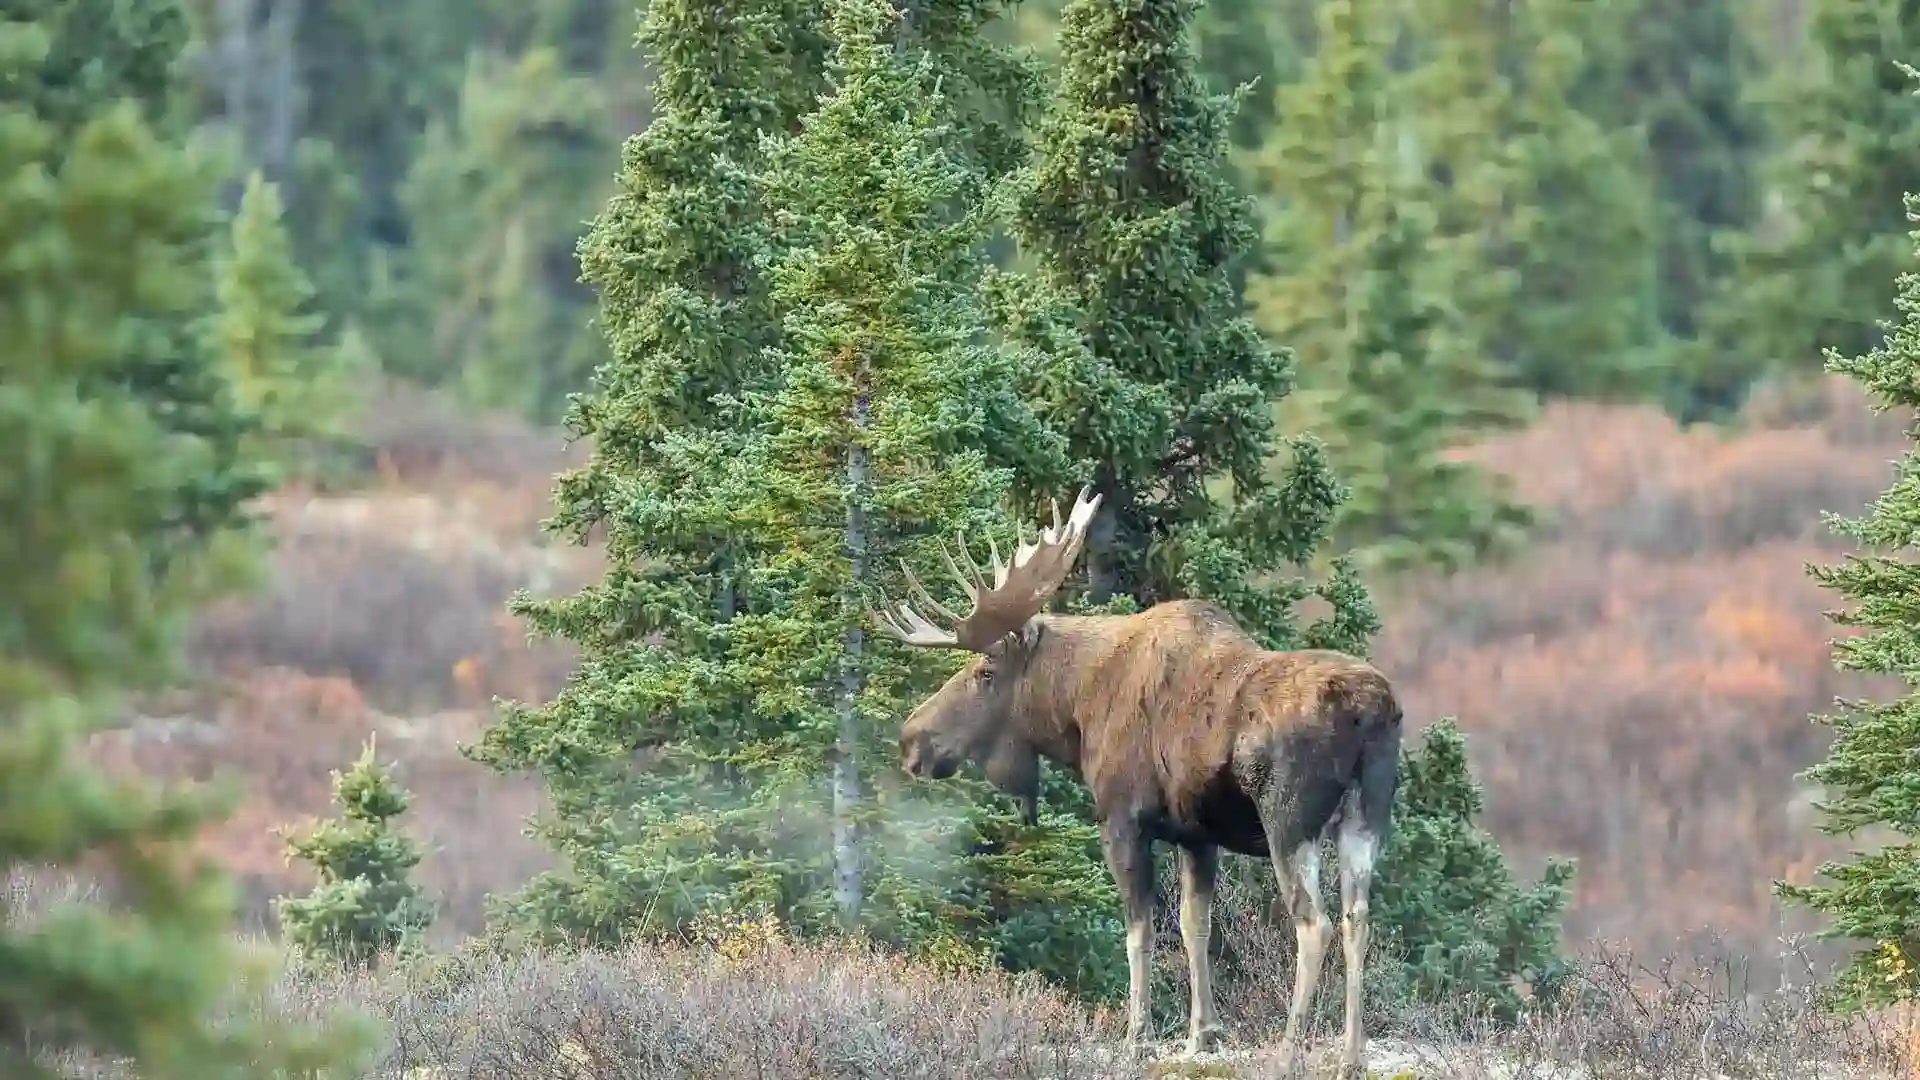 View of moose and tall trees.